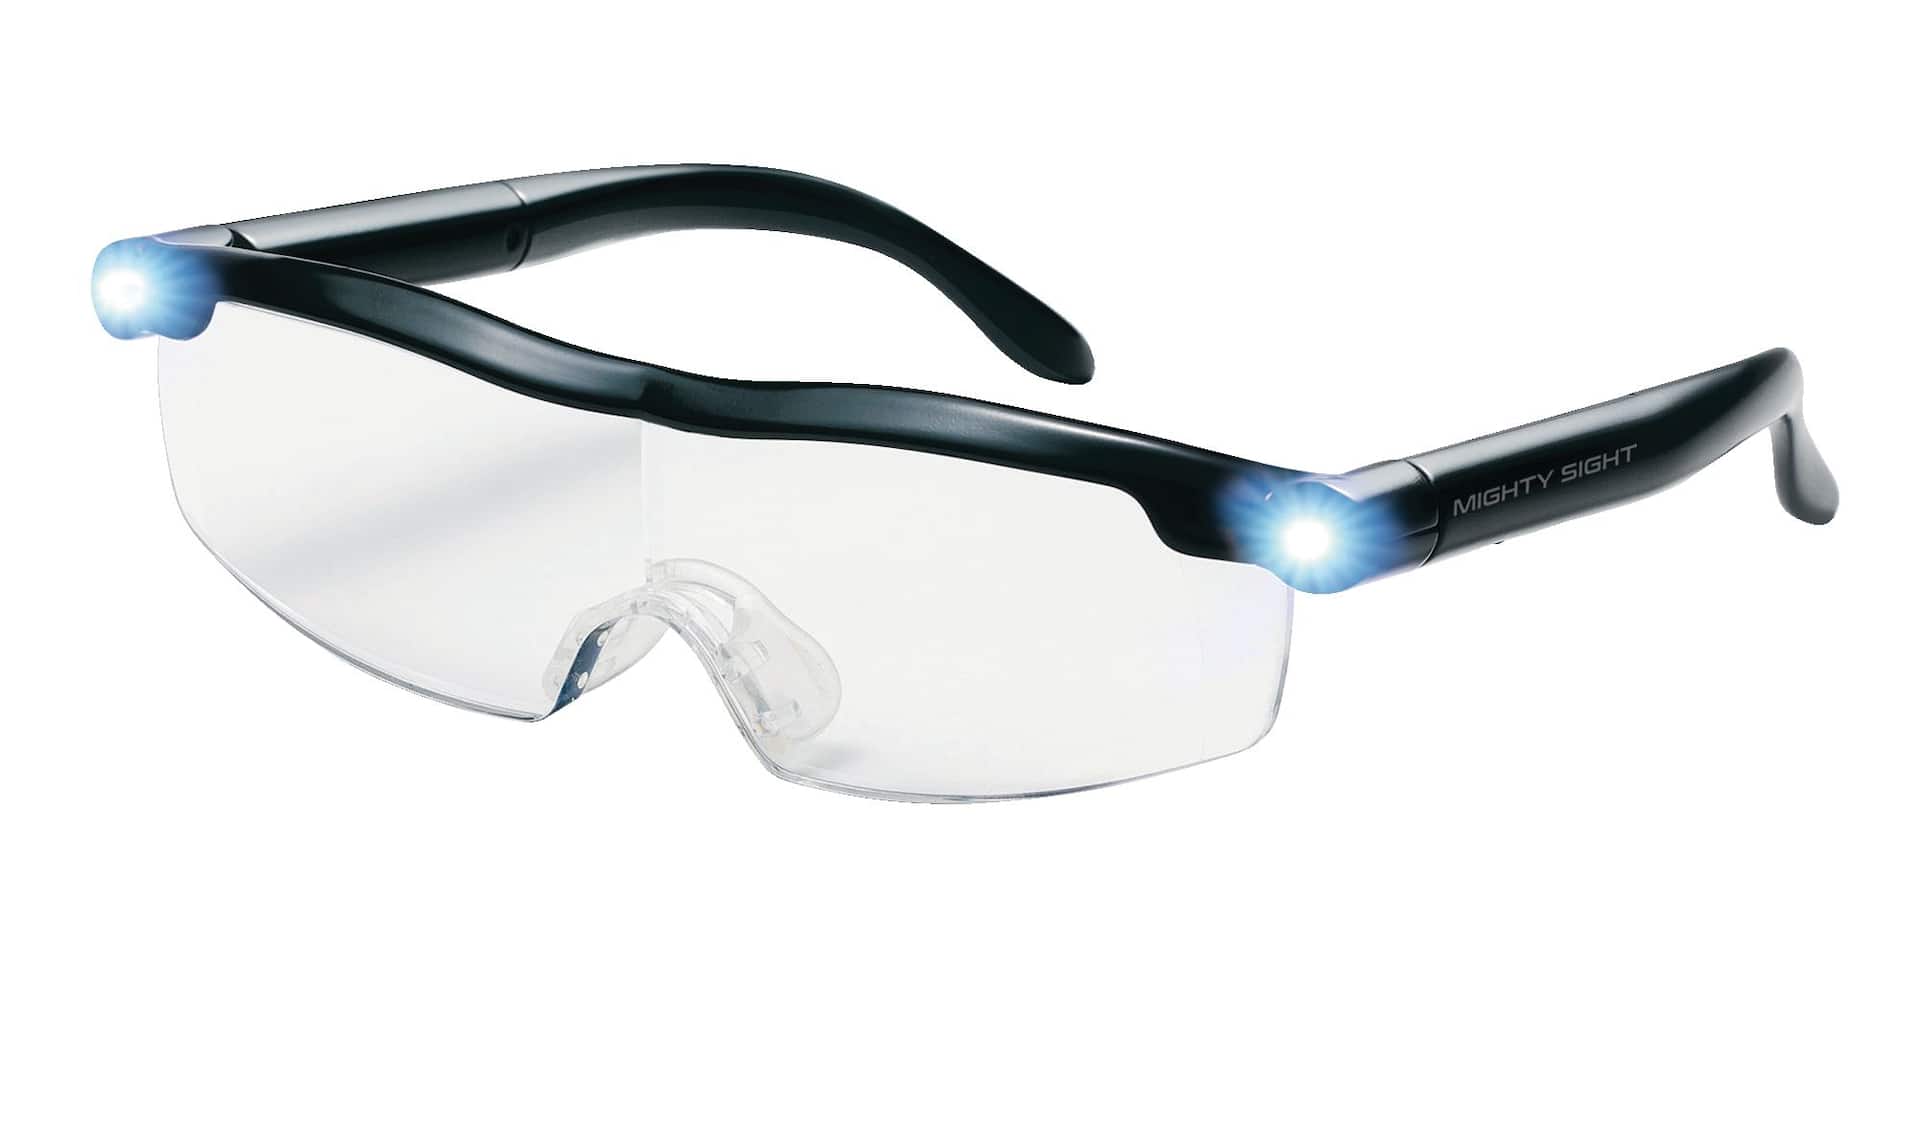 https://media-www.canadiantire.ca/product/living/as-seen-on-tv/asotv/3996764/tv-mighty-sight-glasses--1b5ff4cd-cc4c-4dc8-9efb-a92edf0d1907-jpgrendition.jpg